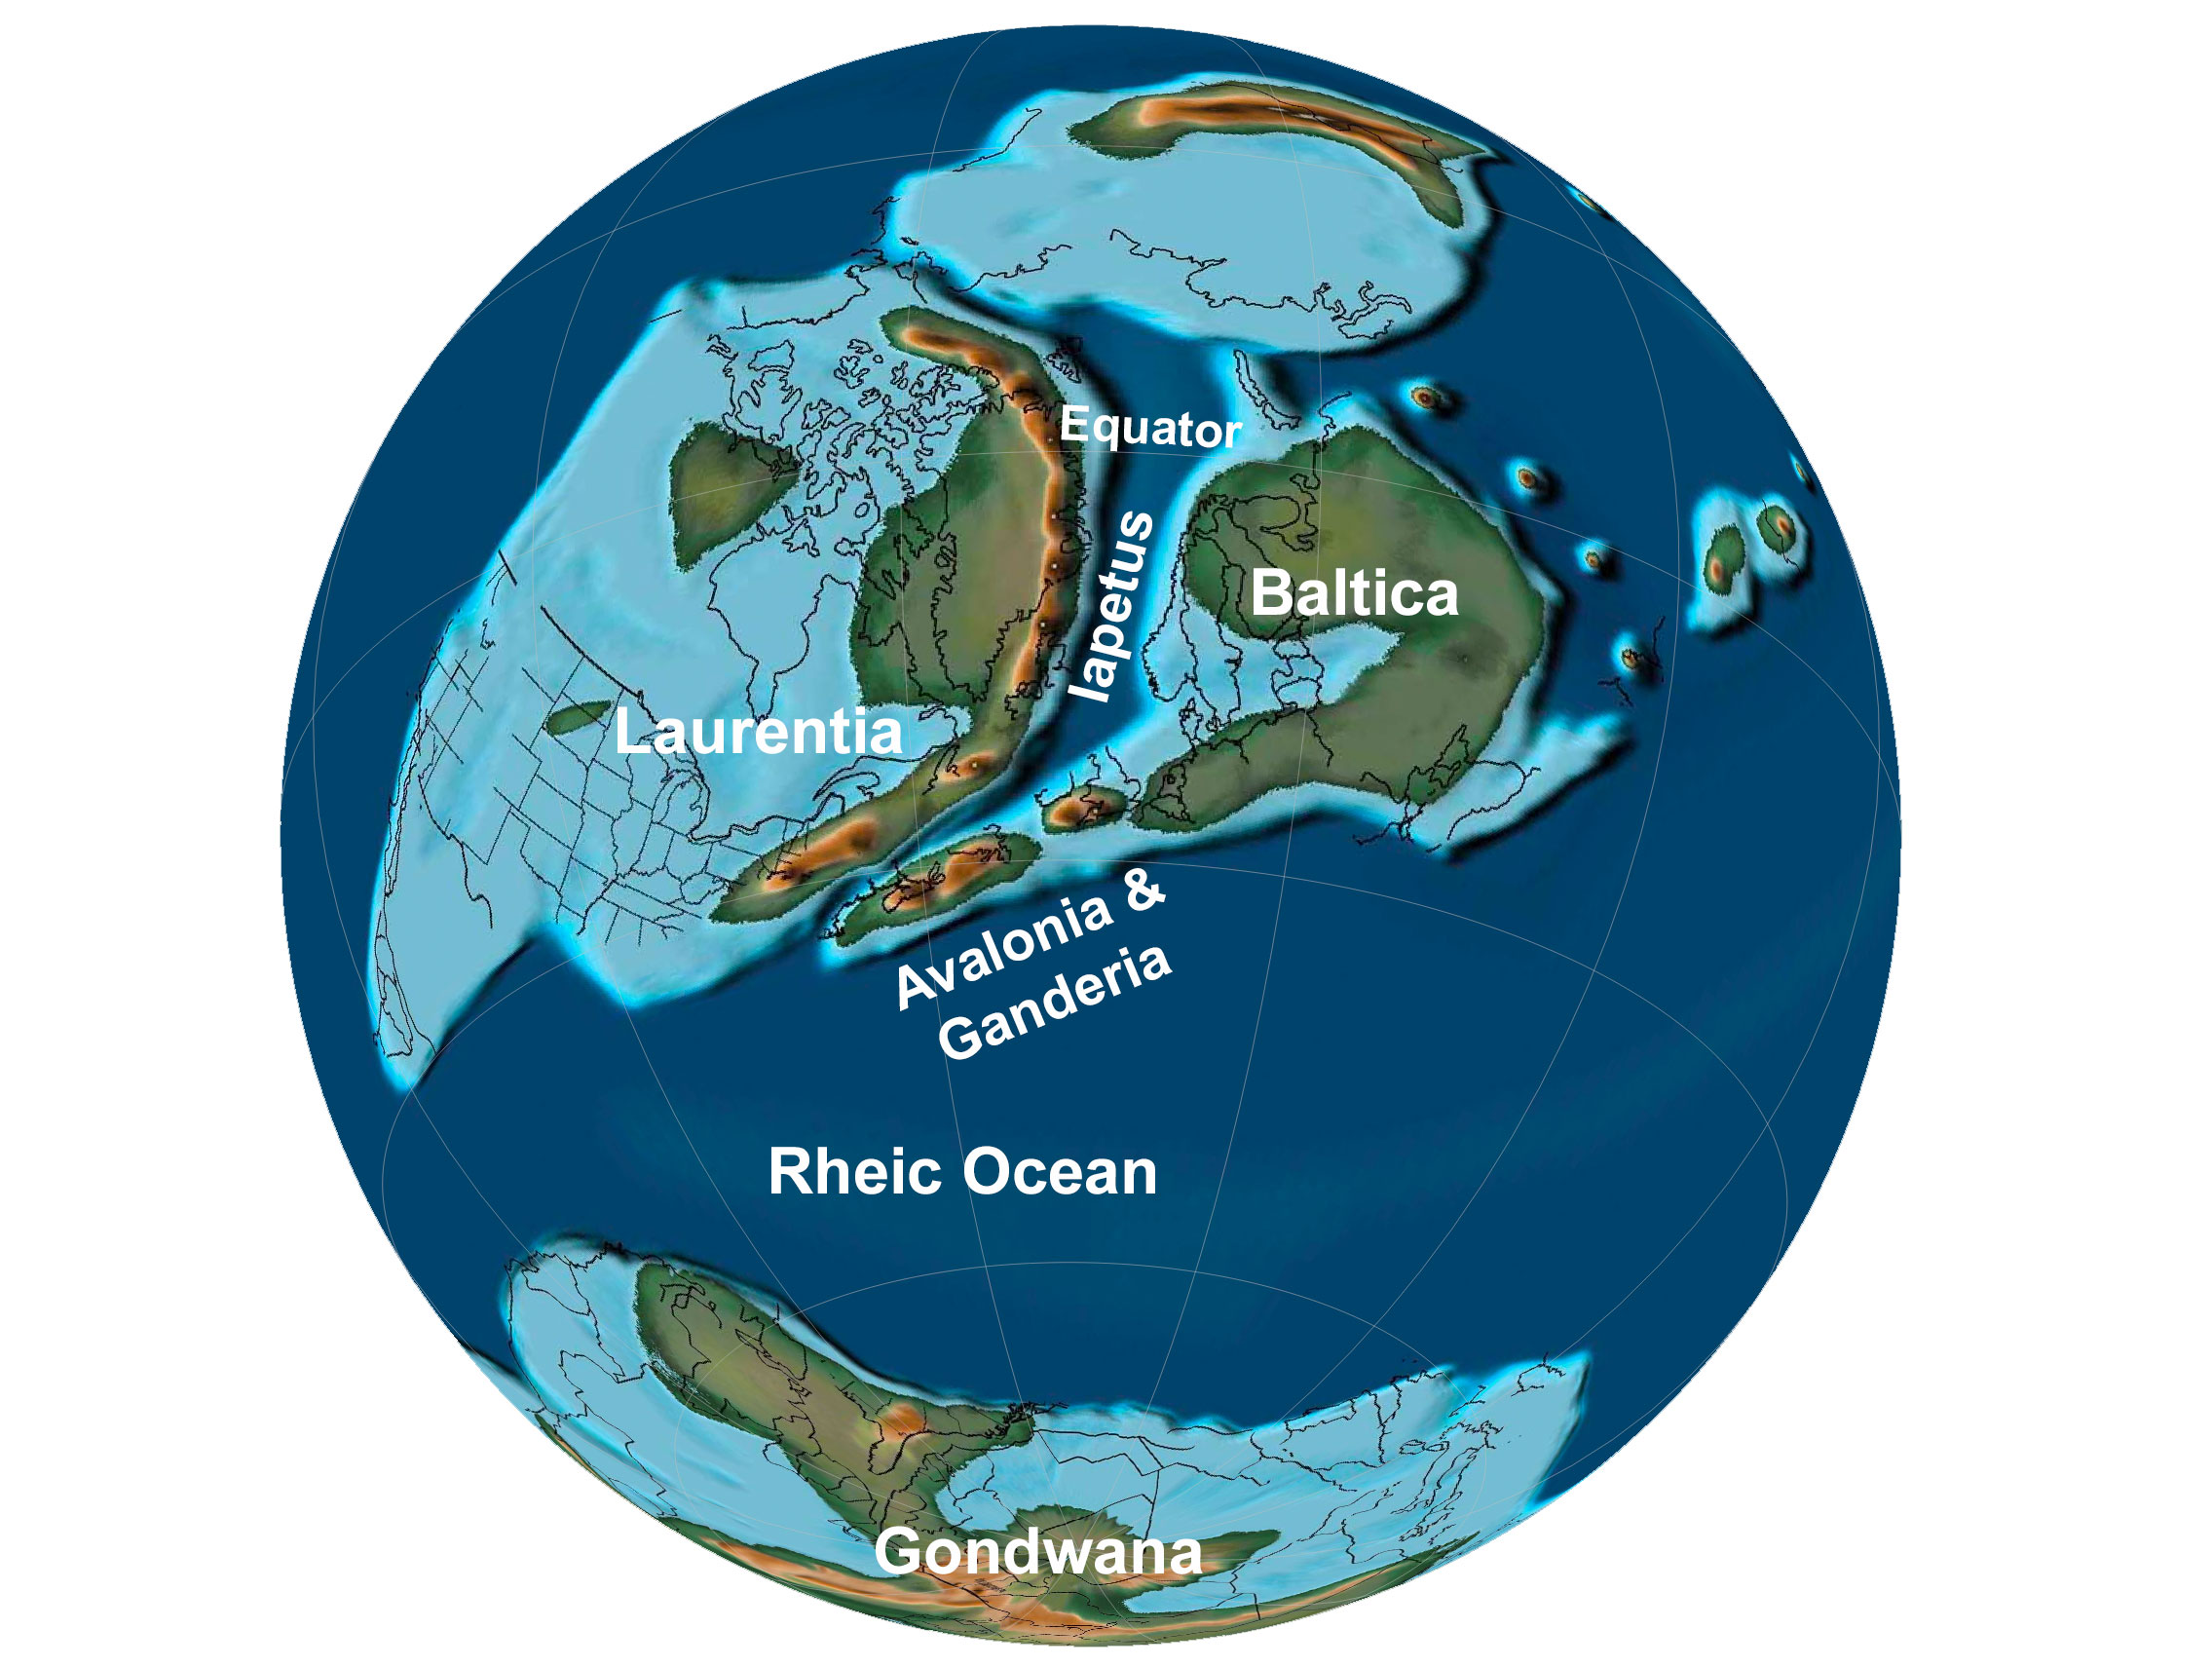 Illustration depicting the collision of North American and Baltica during the Devonian.